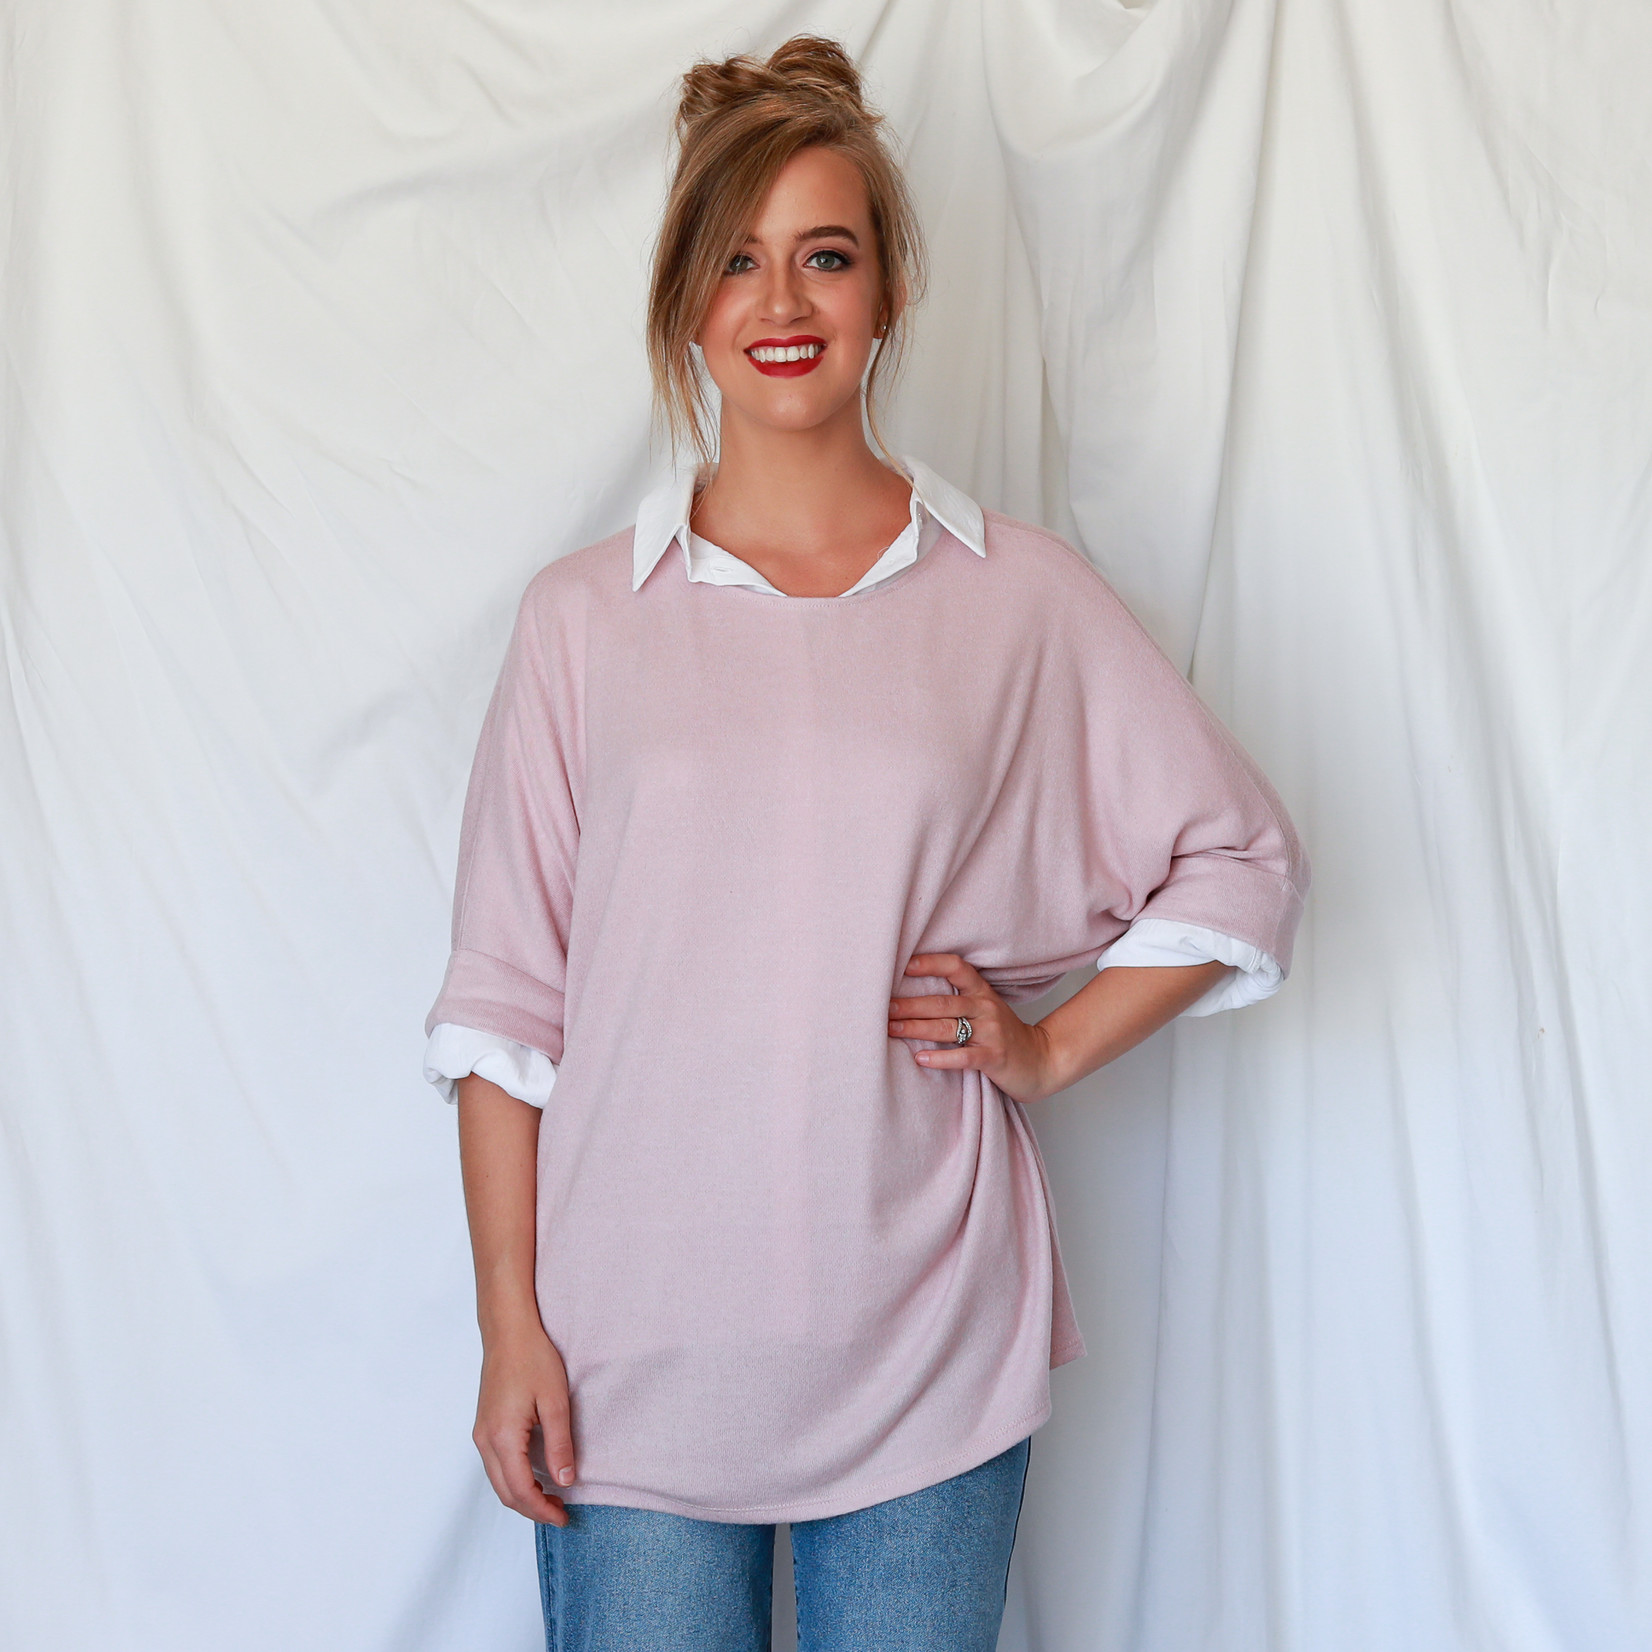 Apricot soft batwing top